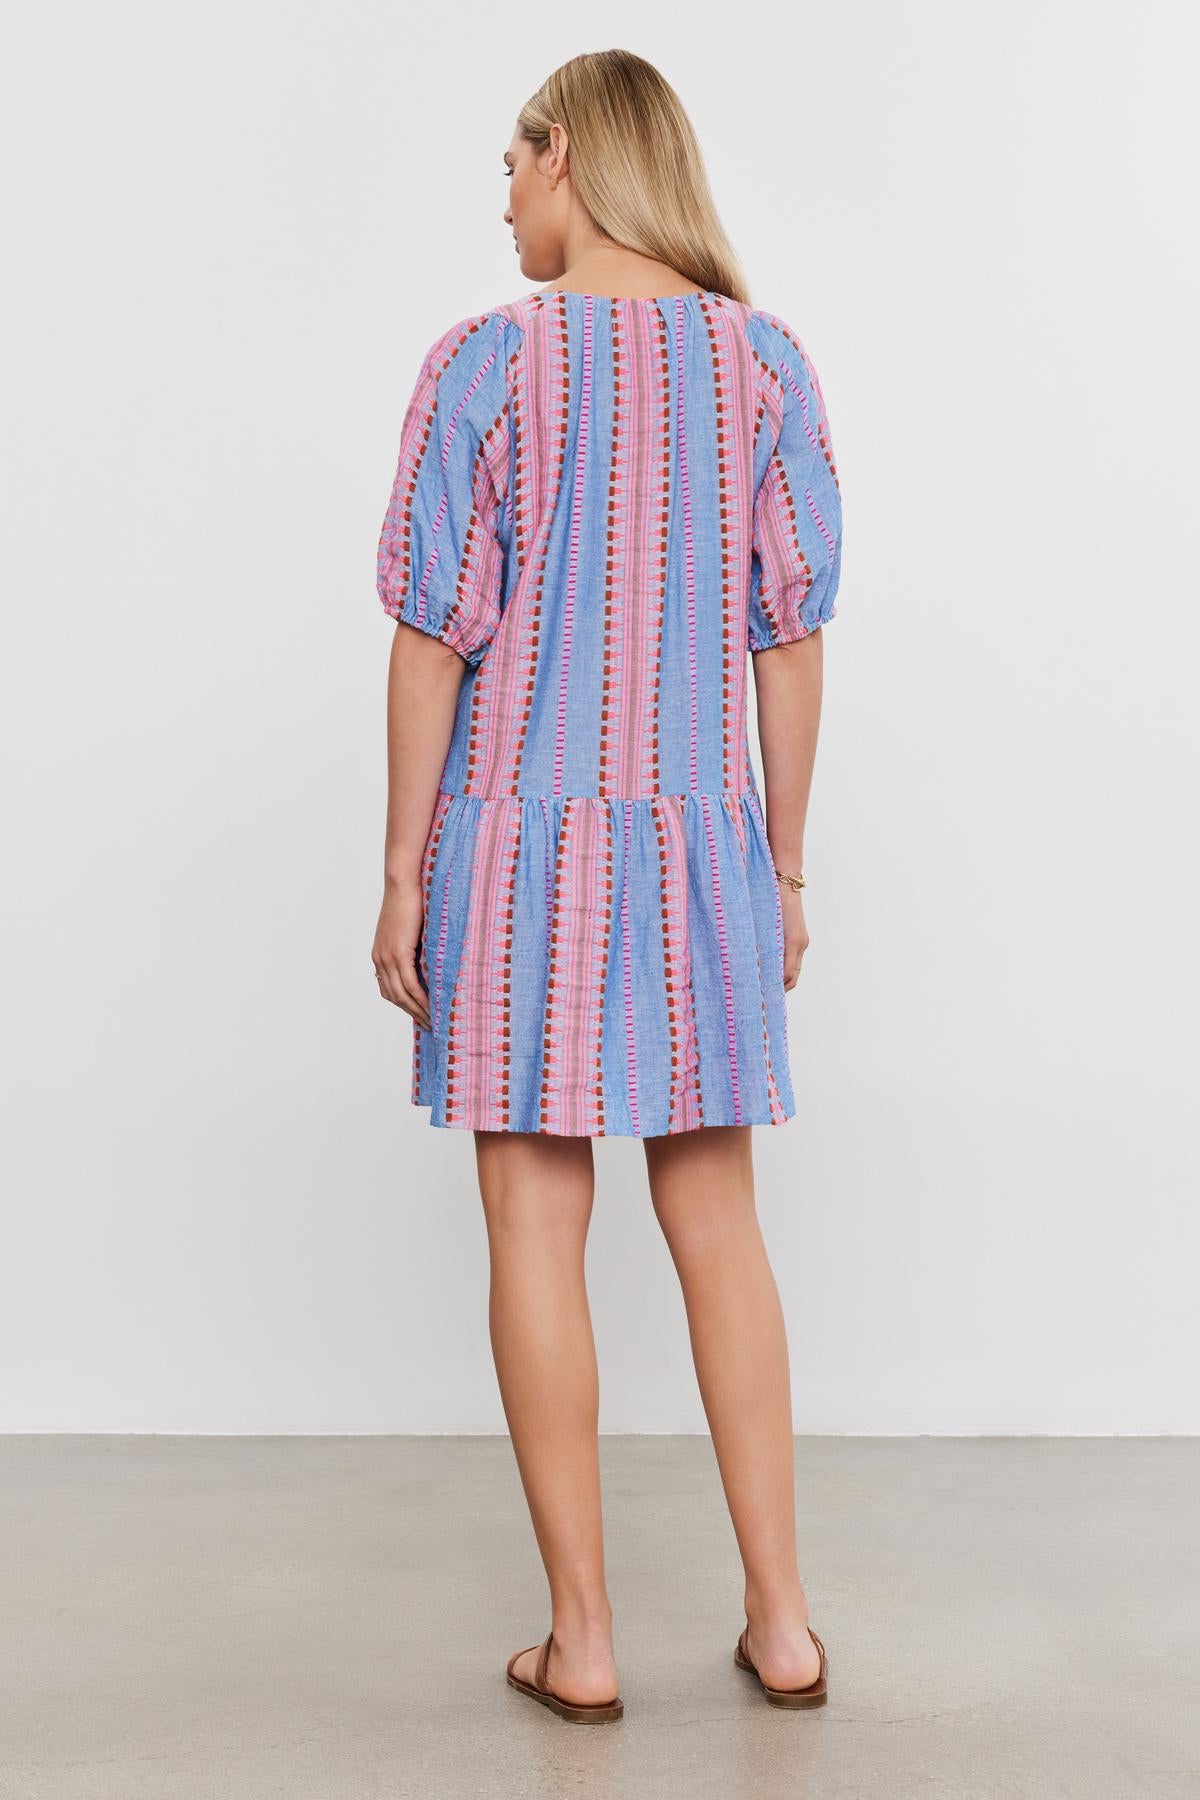 Woman standing with her back to the camera, wearing a short blue and pink striped cotton jacquard ZOELLE DRESS with puff sleeves by Velvet by Graham & Spencer.-36910102347969